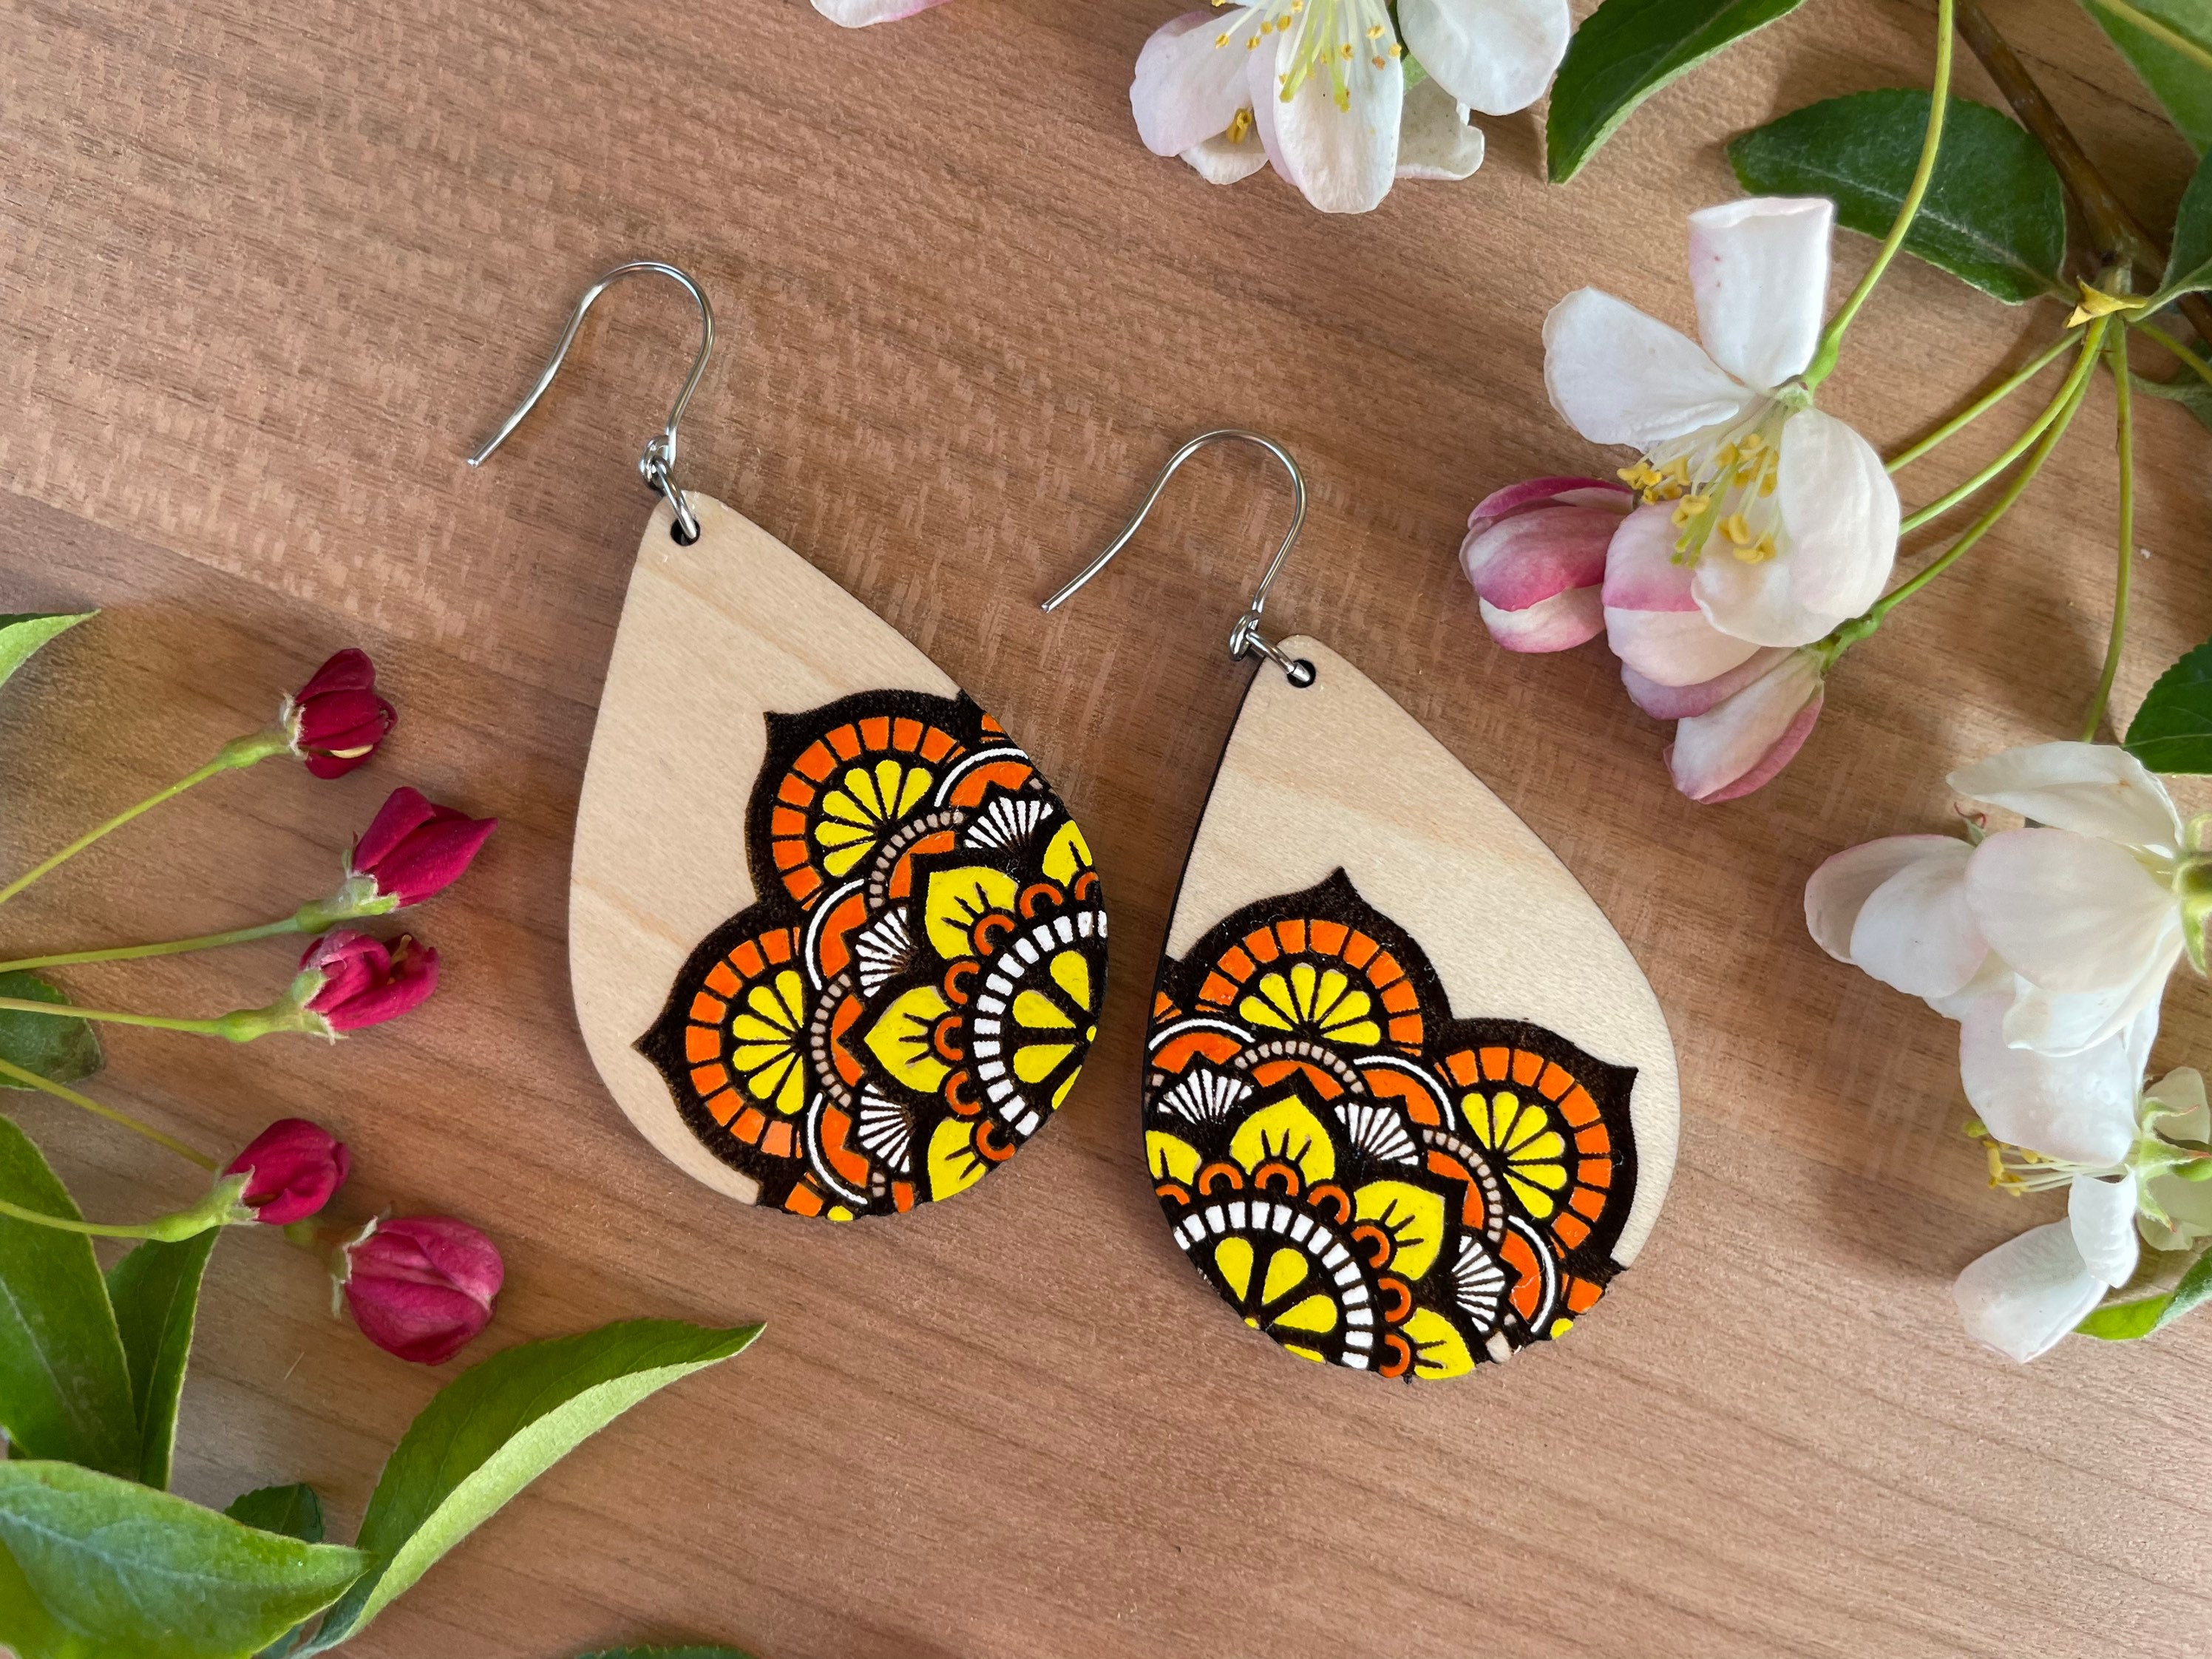 Buy Hand Painted Wooden Earrings, Dot Painted Earrings, Earring Pair,  Mandala Style, Handmade Jewelry, Unique Gift for Her Online in India - Etsy